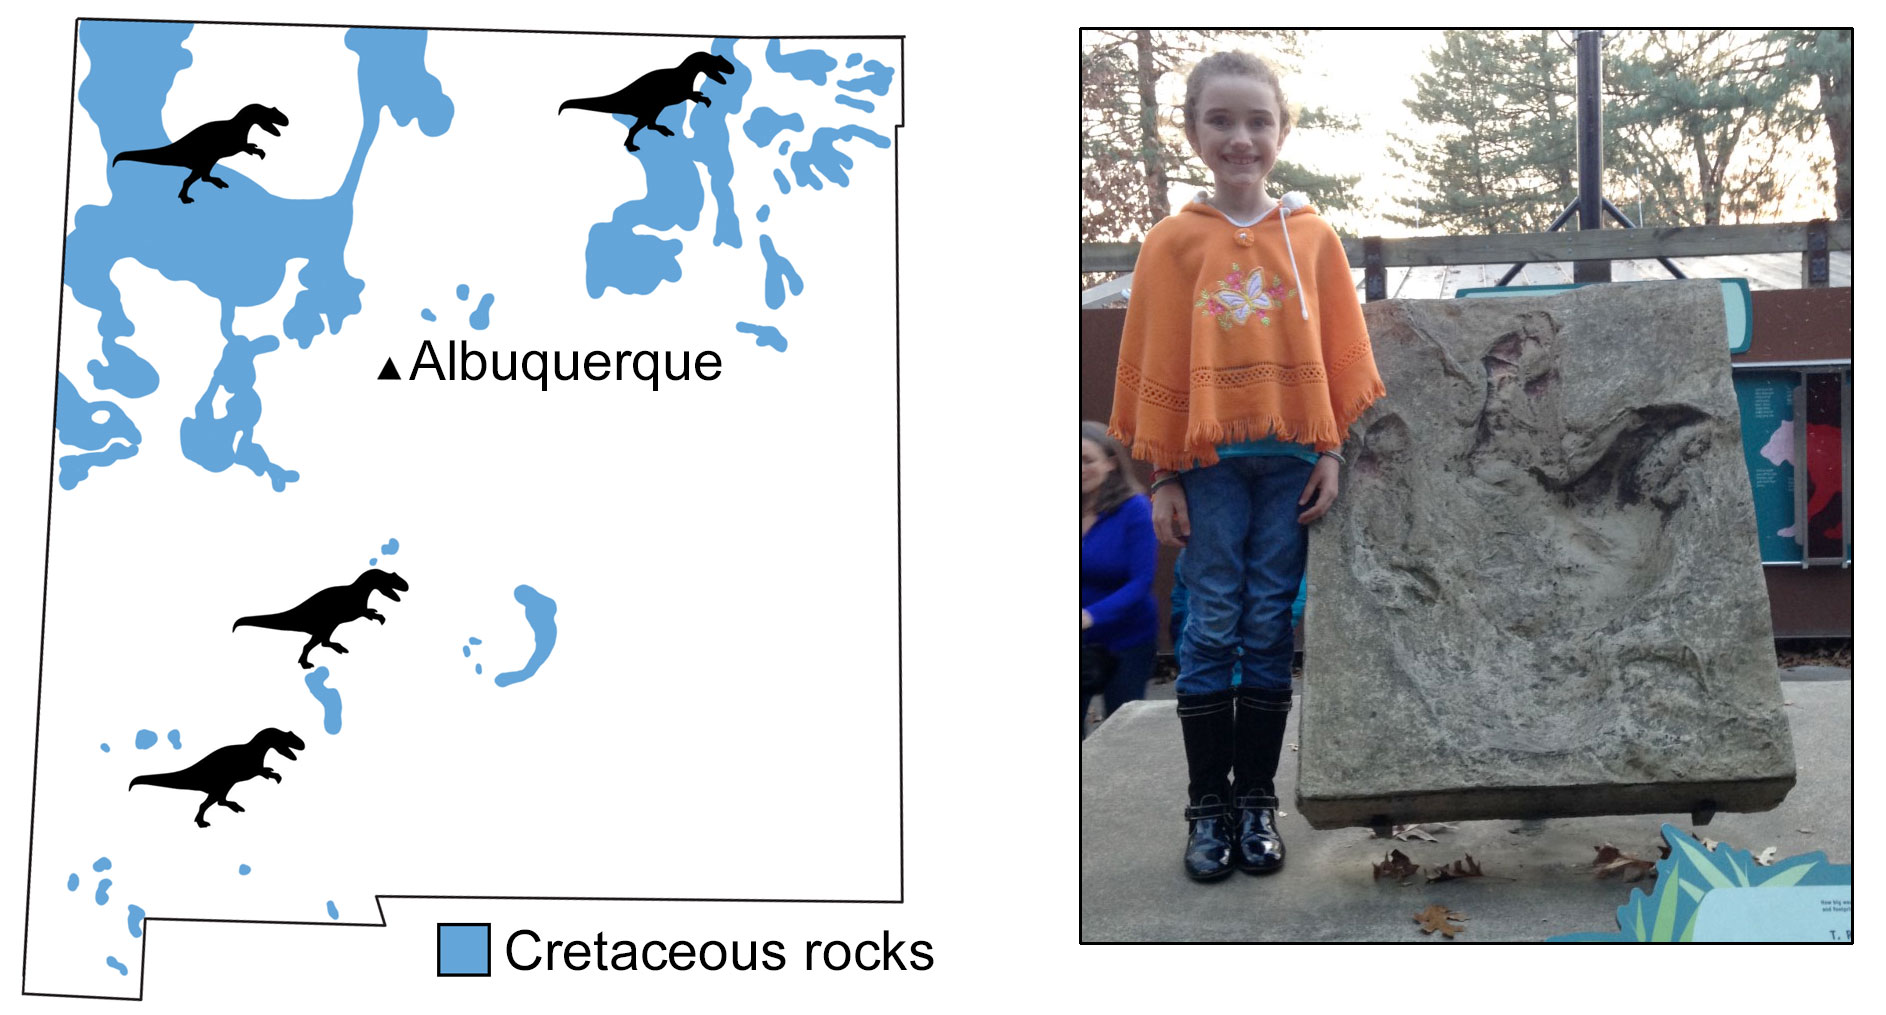 2-panel image. Panel 1: Diagram showing an outline of the state of New Mexico with Cretaceous rocks shaded light blue. The position of Albuquerque in the northwestern part of the state is indicated. Four dinosaur silhouettes show where tyrannosaur fossils have been found. Panel 2: Photograph of a young girl standing next to the cast of a large, three-toed footprint thought to be a Tyrannosaurus rex footprint. The footprint is about two-thirds the height of the girl.